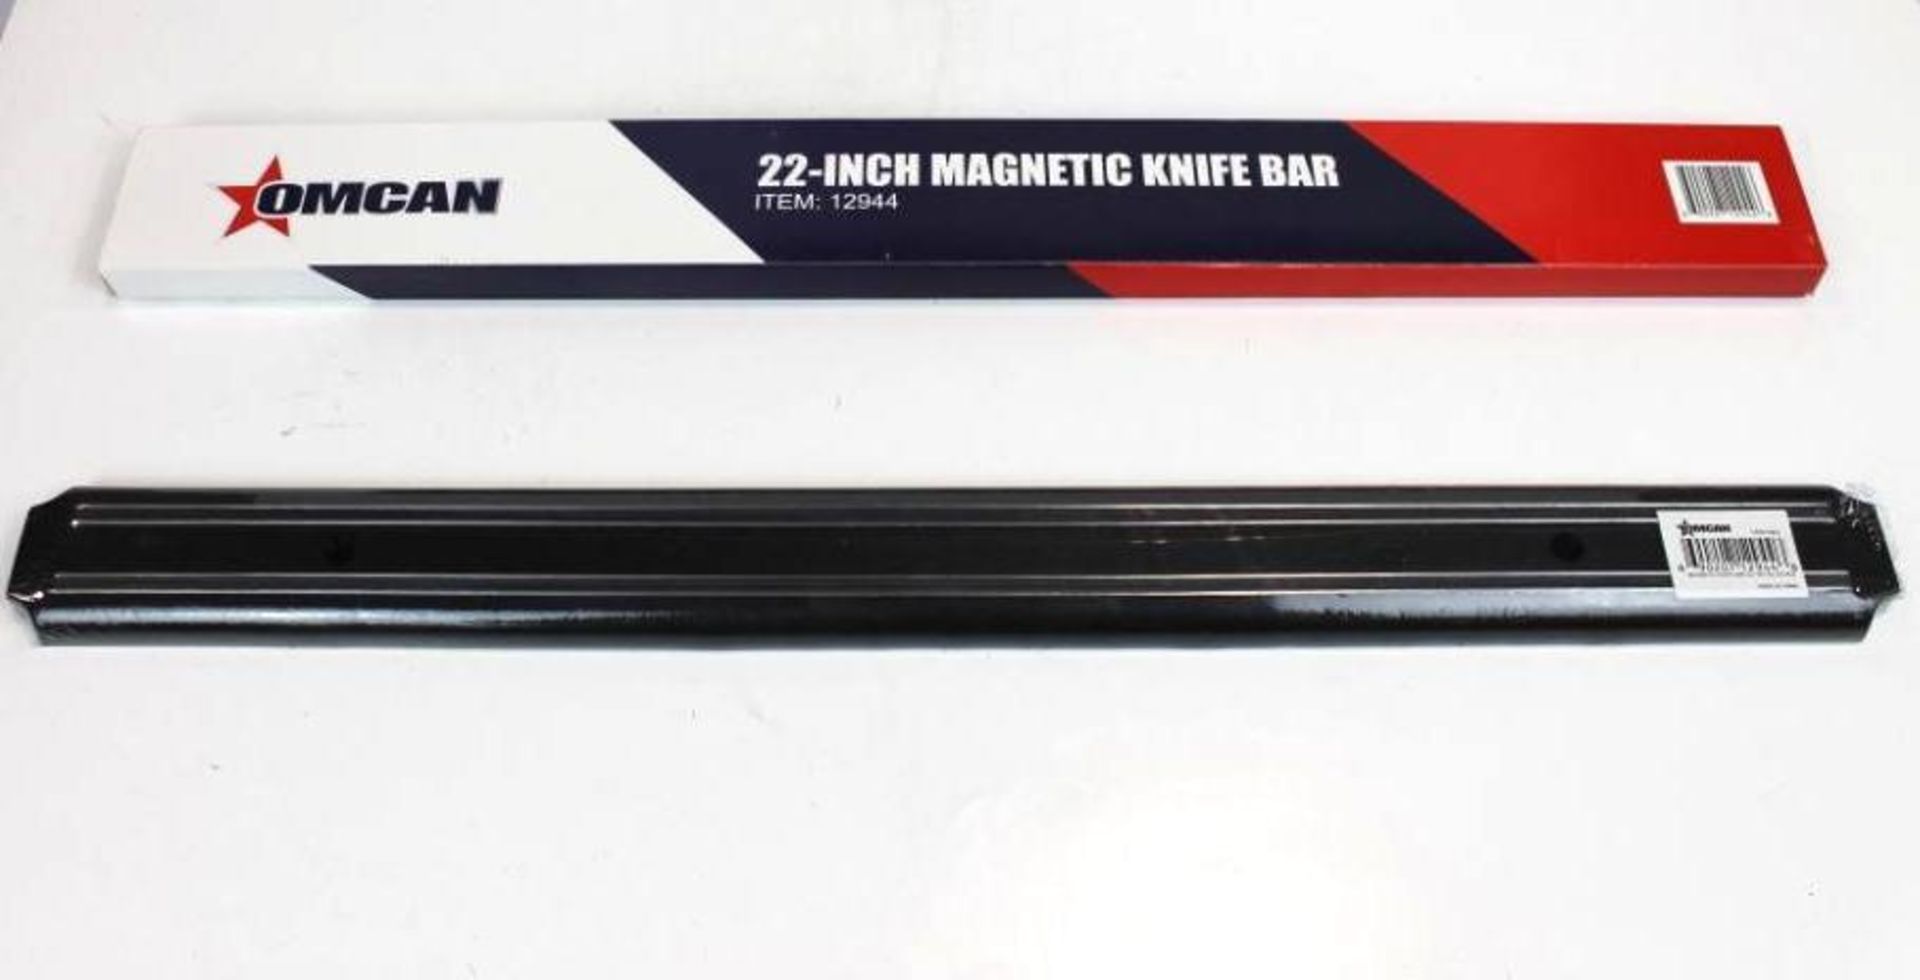 22" PLASTIC MAGNETIC KNIFE BAR - LOT OF 2 - OMCAN 12944 - Image 2 of 2